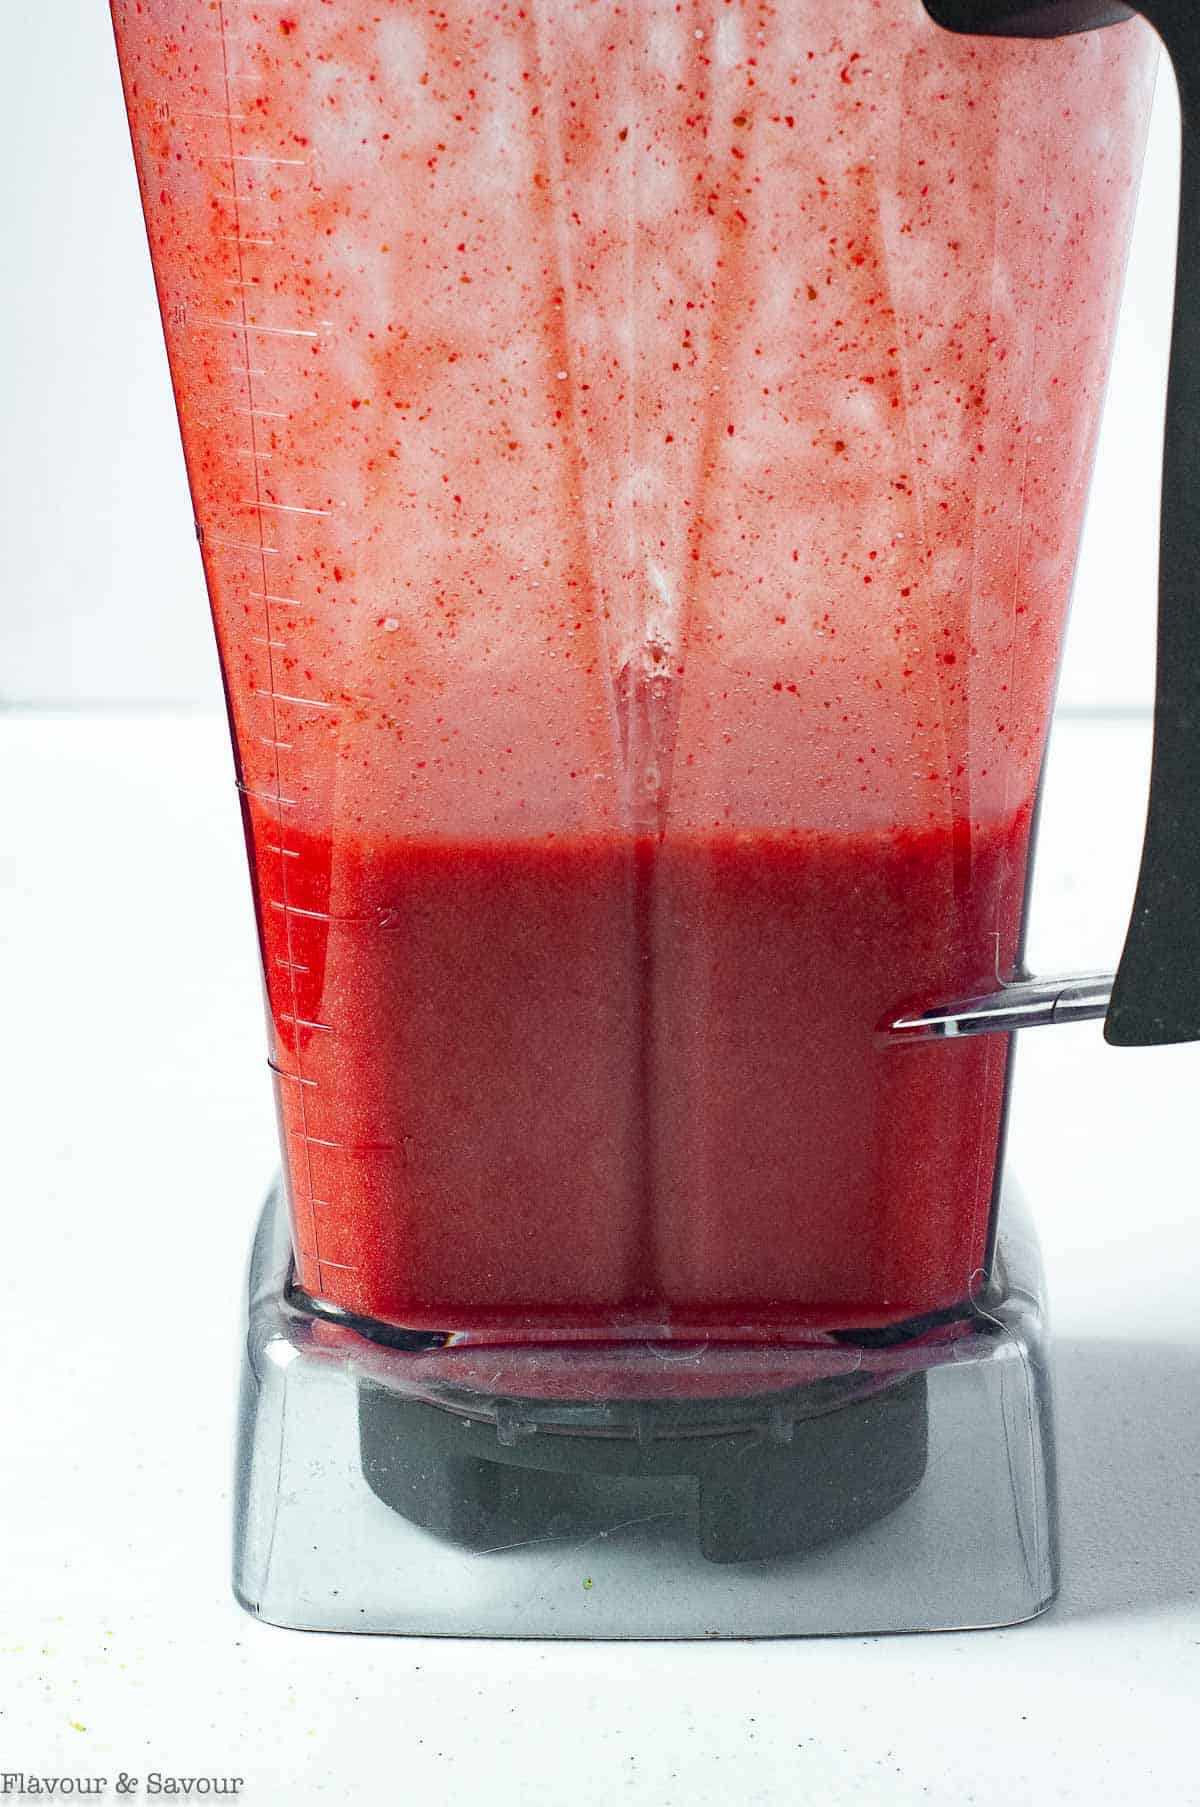 Sparkling strawberry limeade mixture in a blender container.